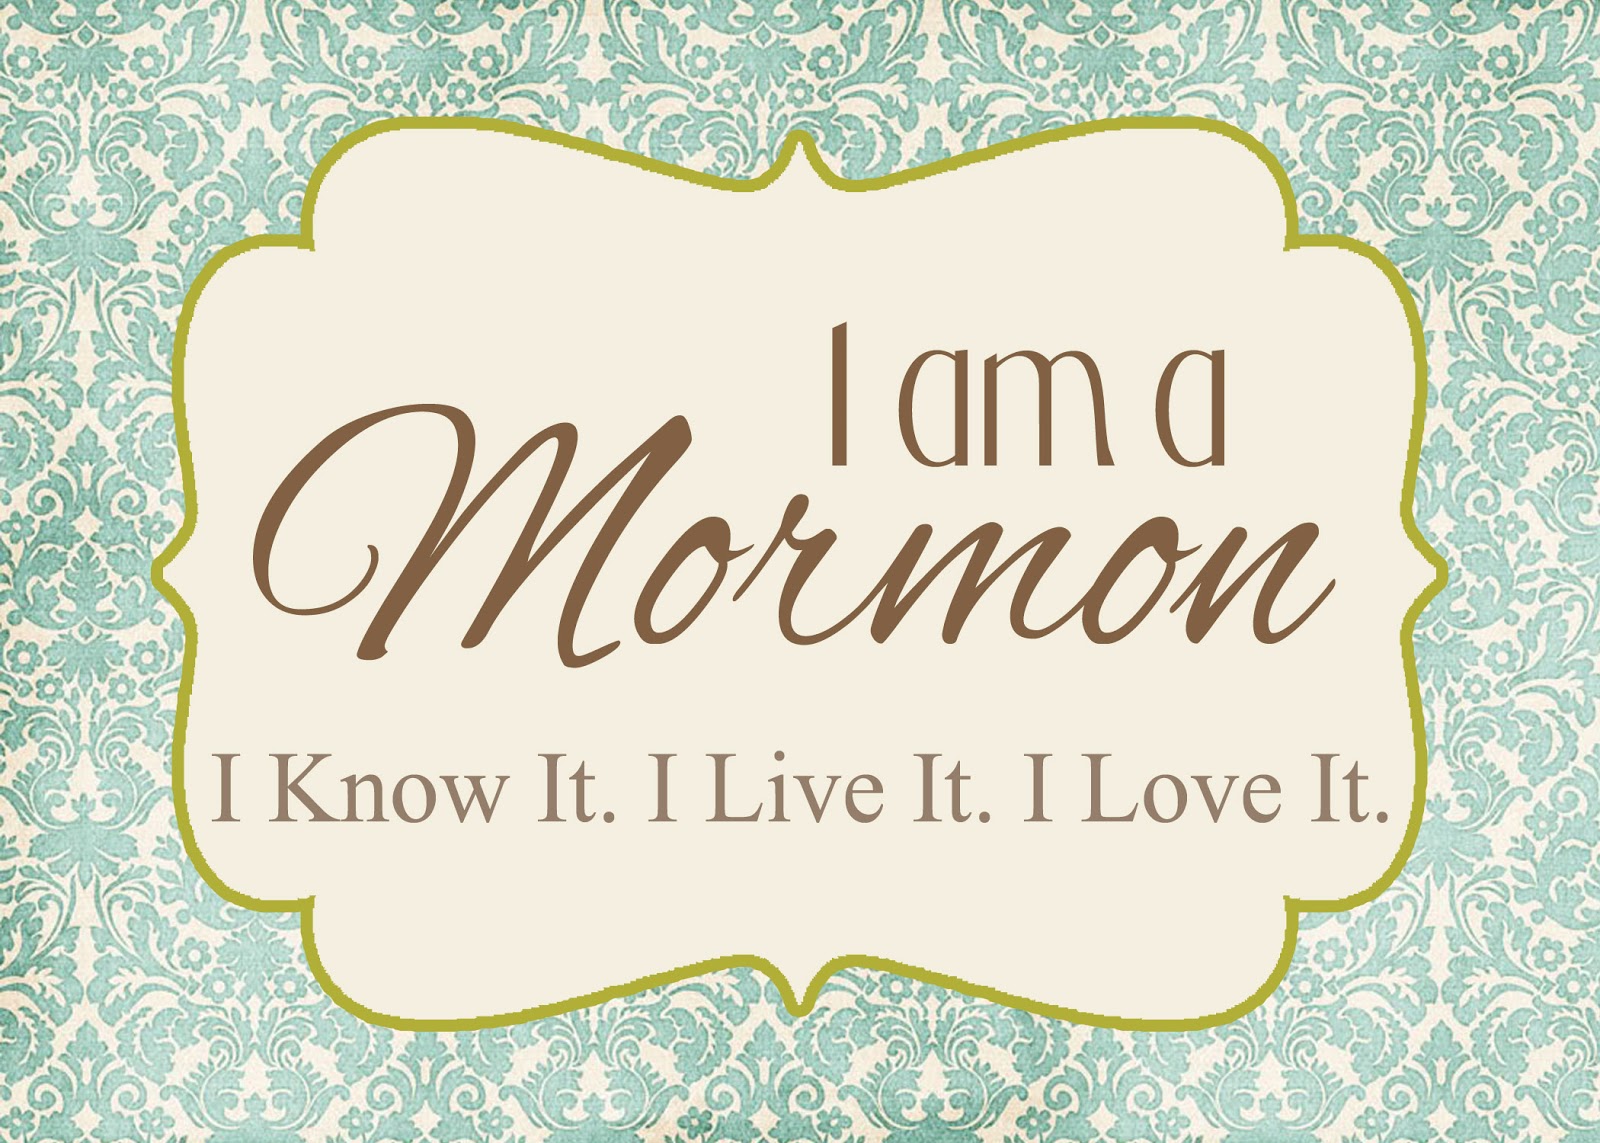 LDS Quotes: Be True to the Faith